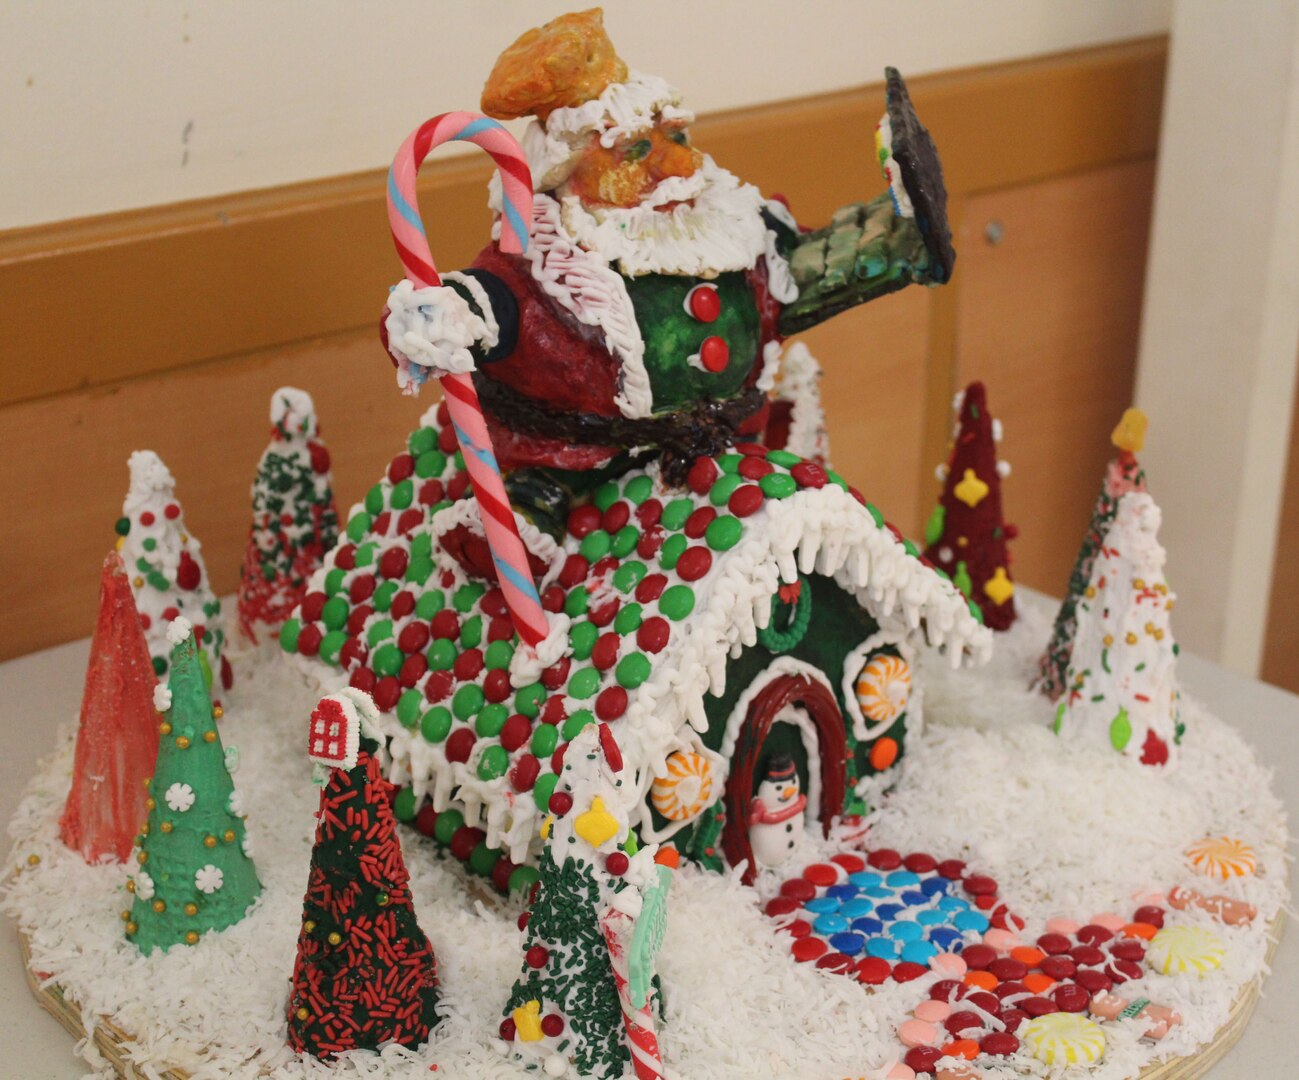 A winter scene depicted with a gingerbread house.